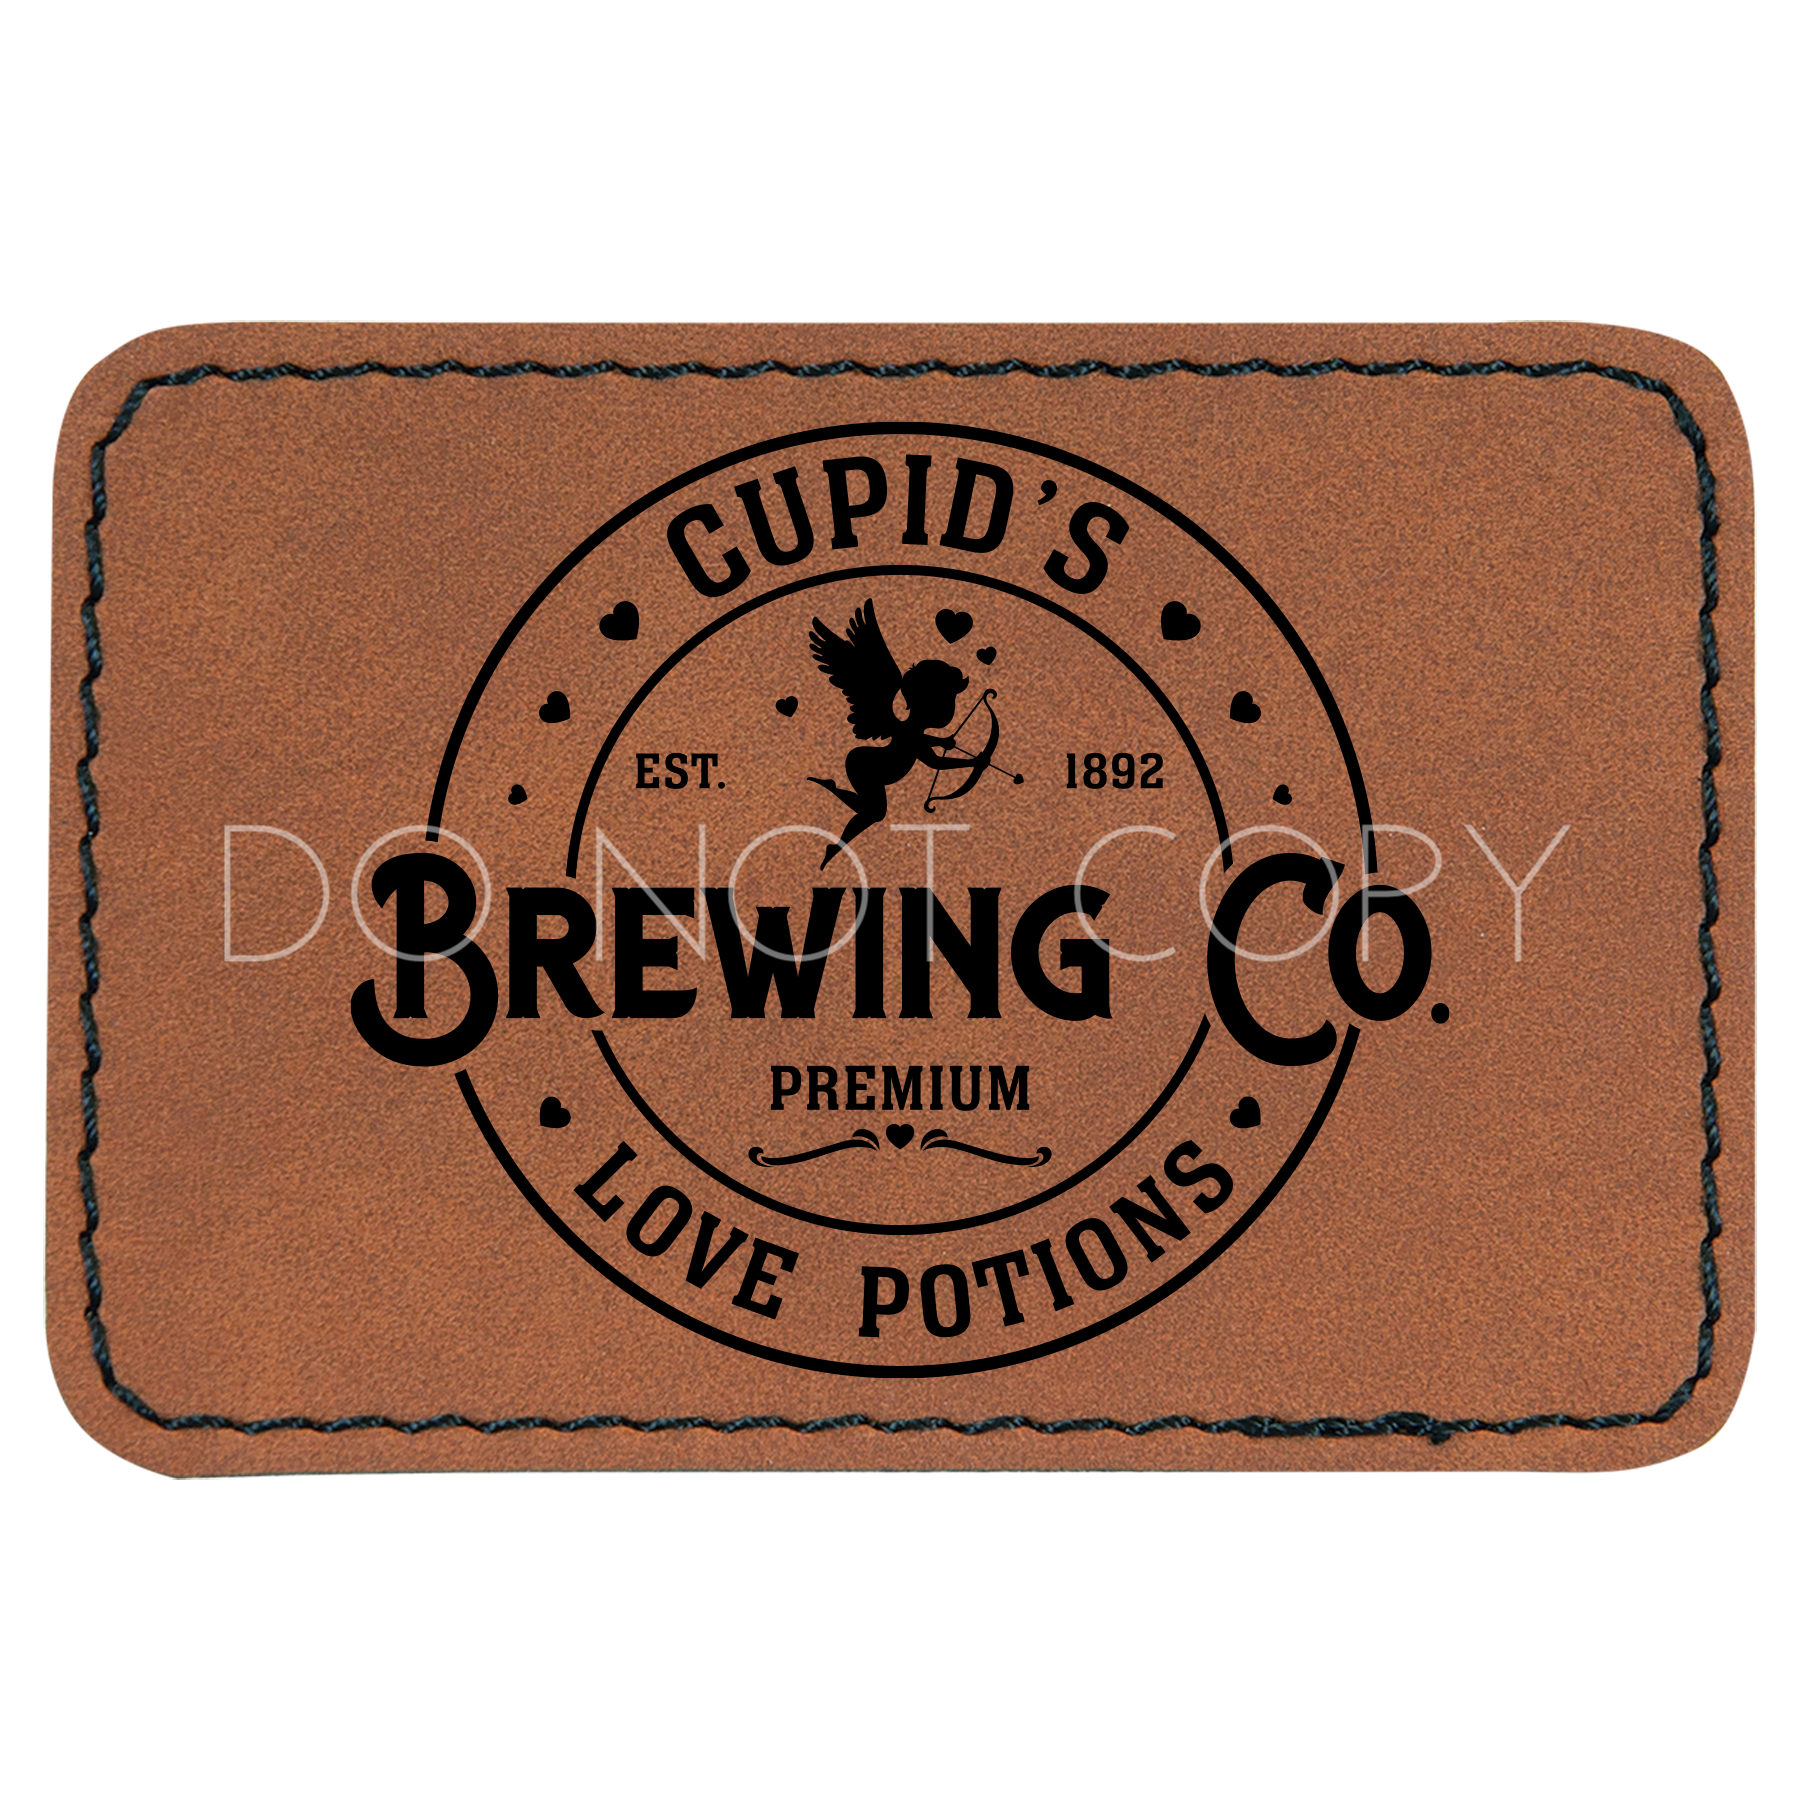 Cupid's Brewing Co. Patch